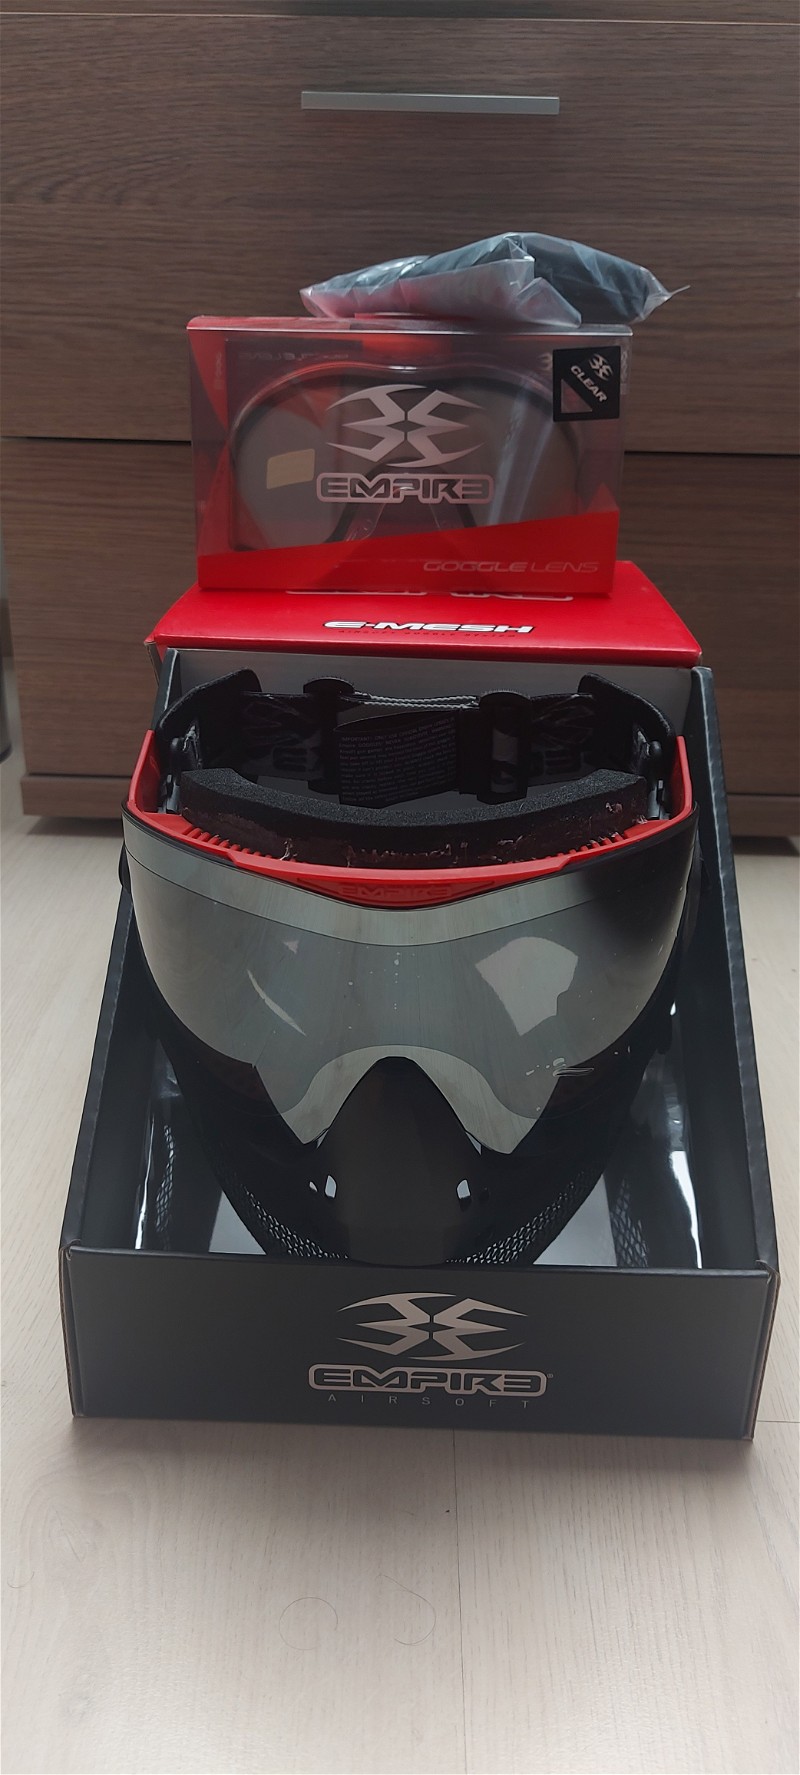 Image 1 for Empire E-mesh Airsoft face mask